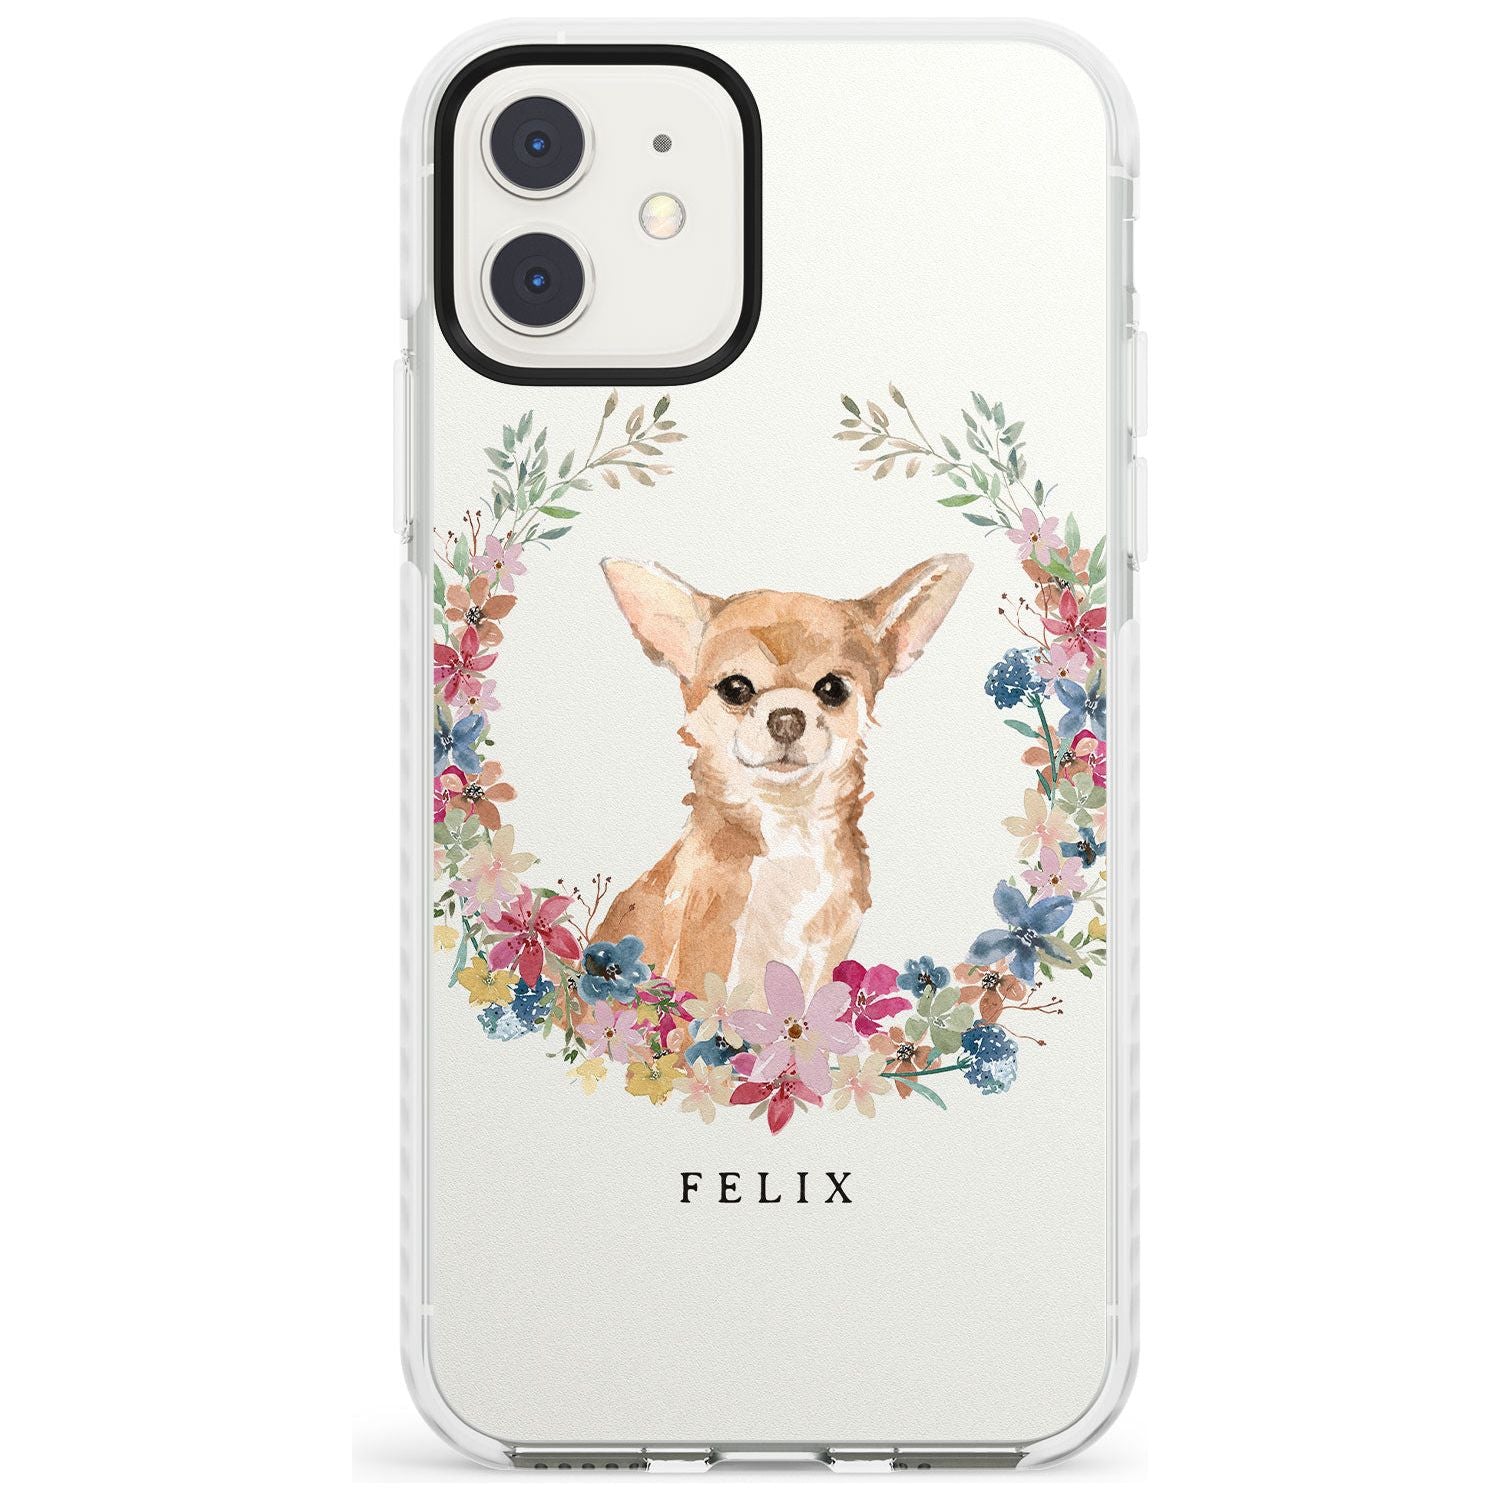 Chihuahua - Watercolour Dog Portrait Impact Phone Case for iPhone 11